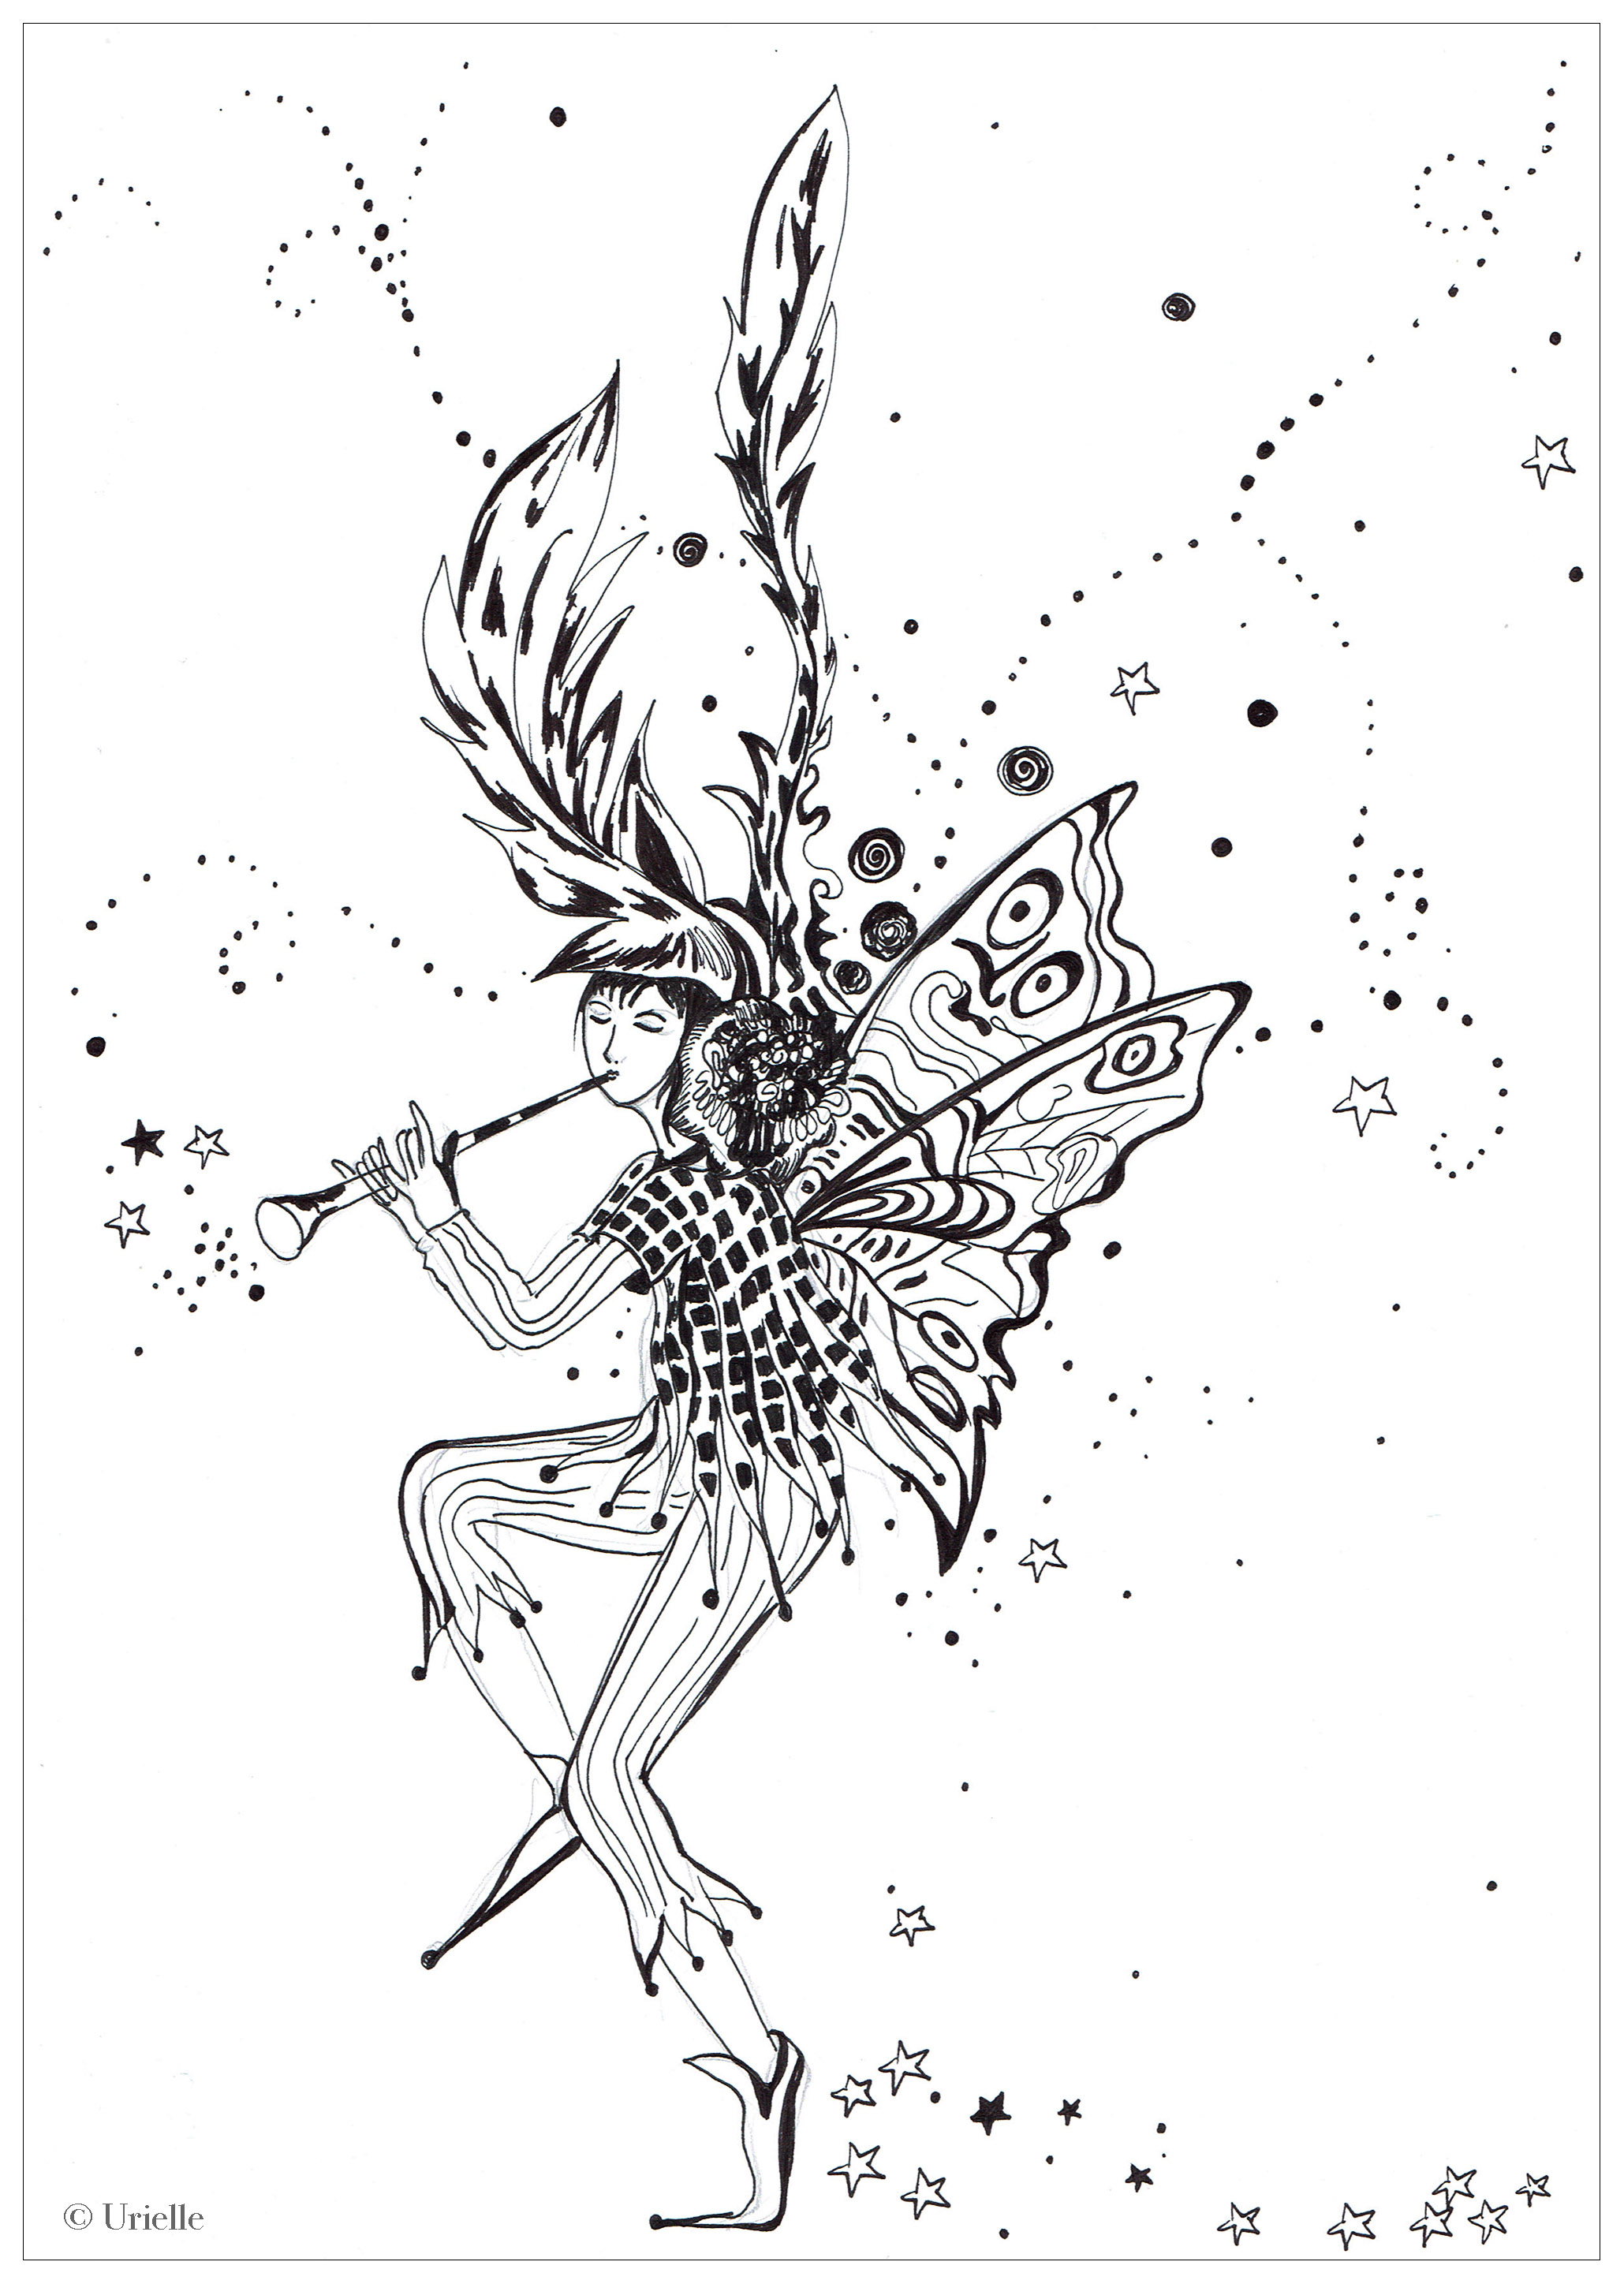 Fairy - Coloring Pages for Adults